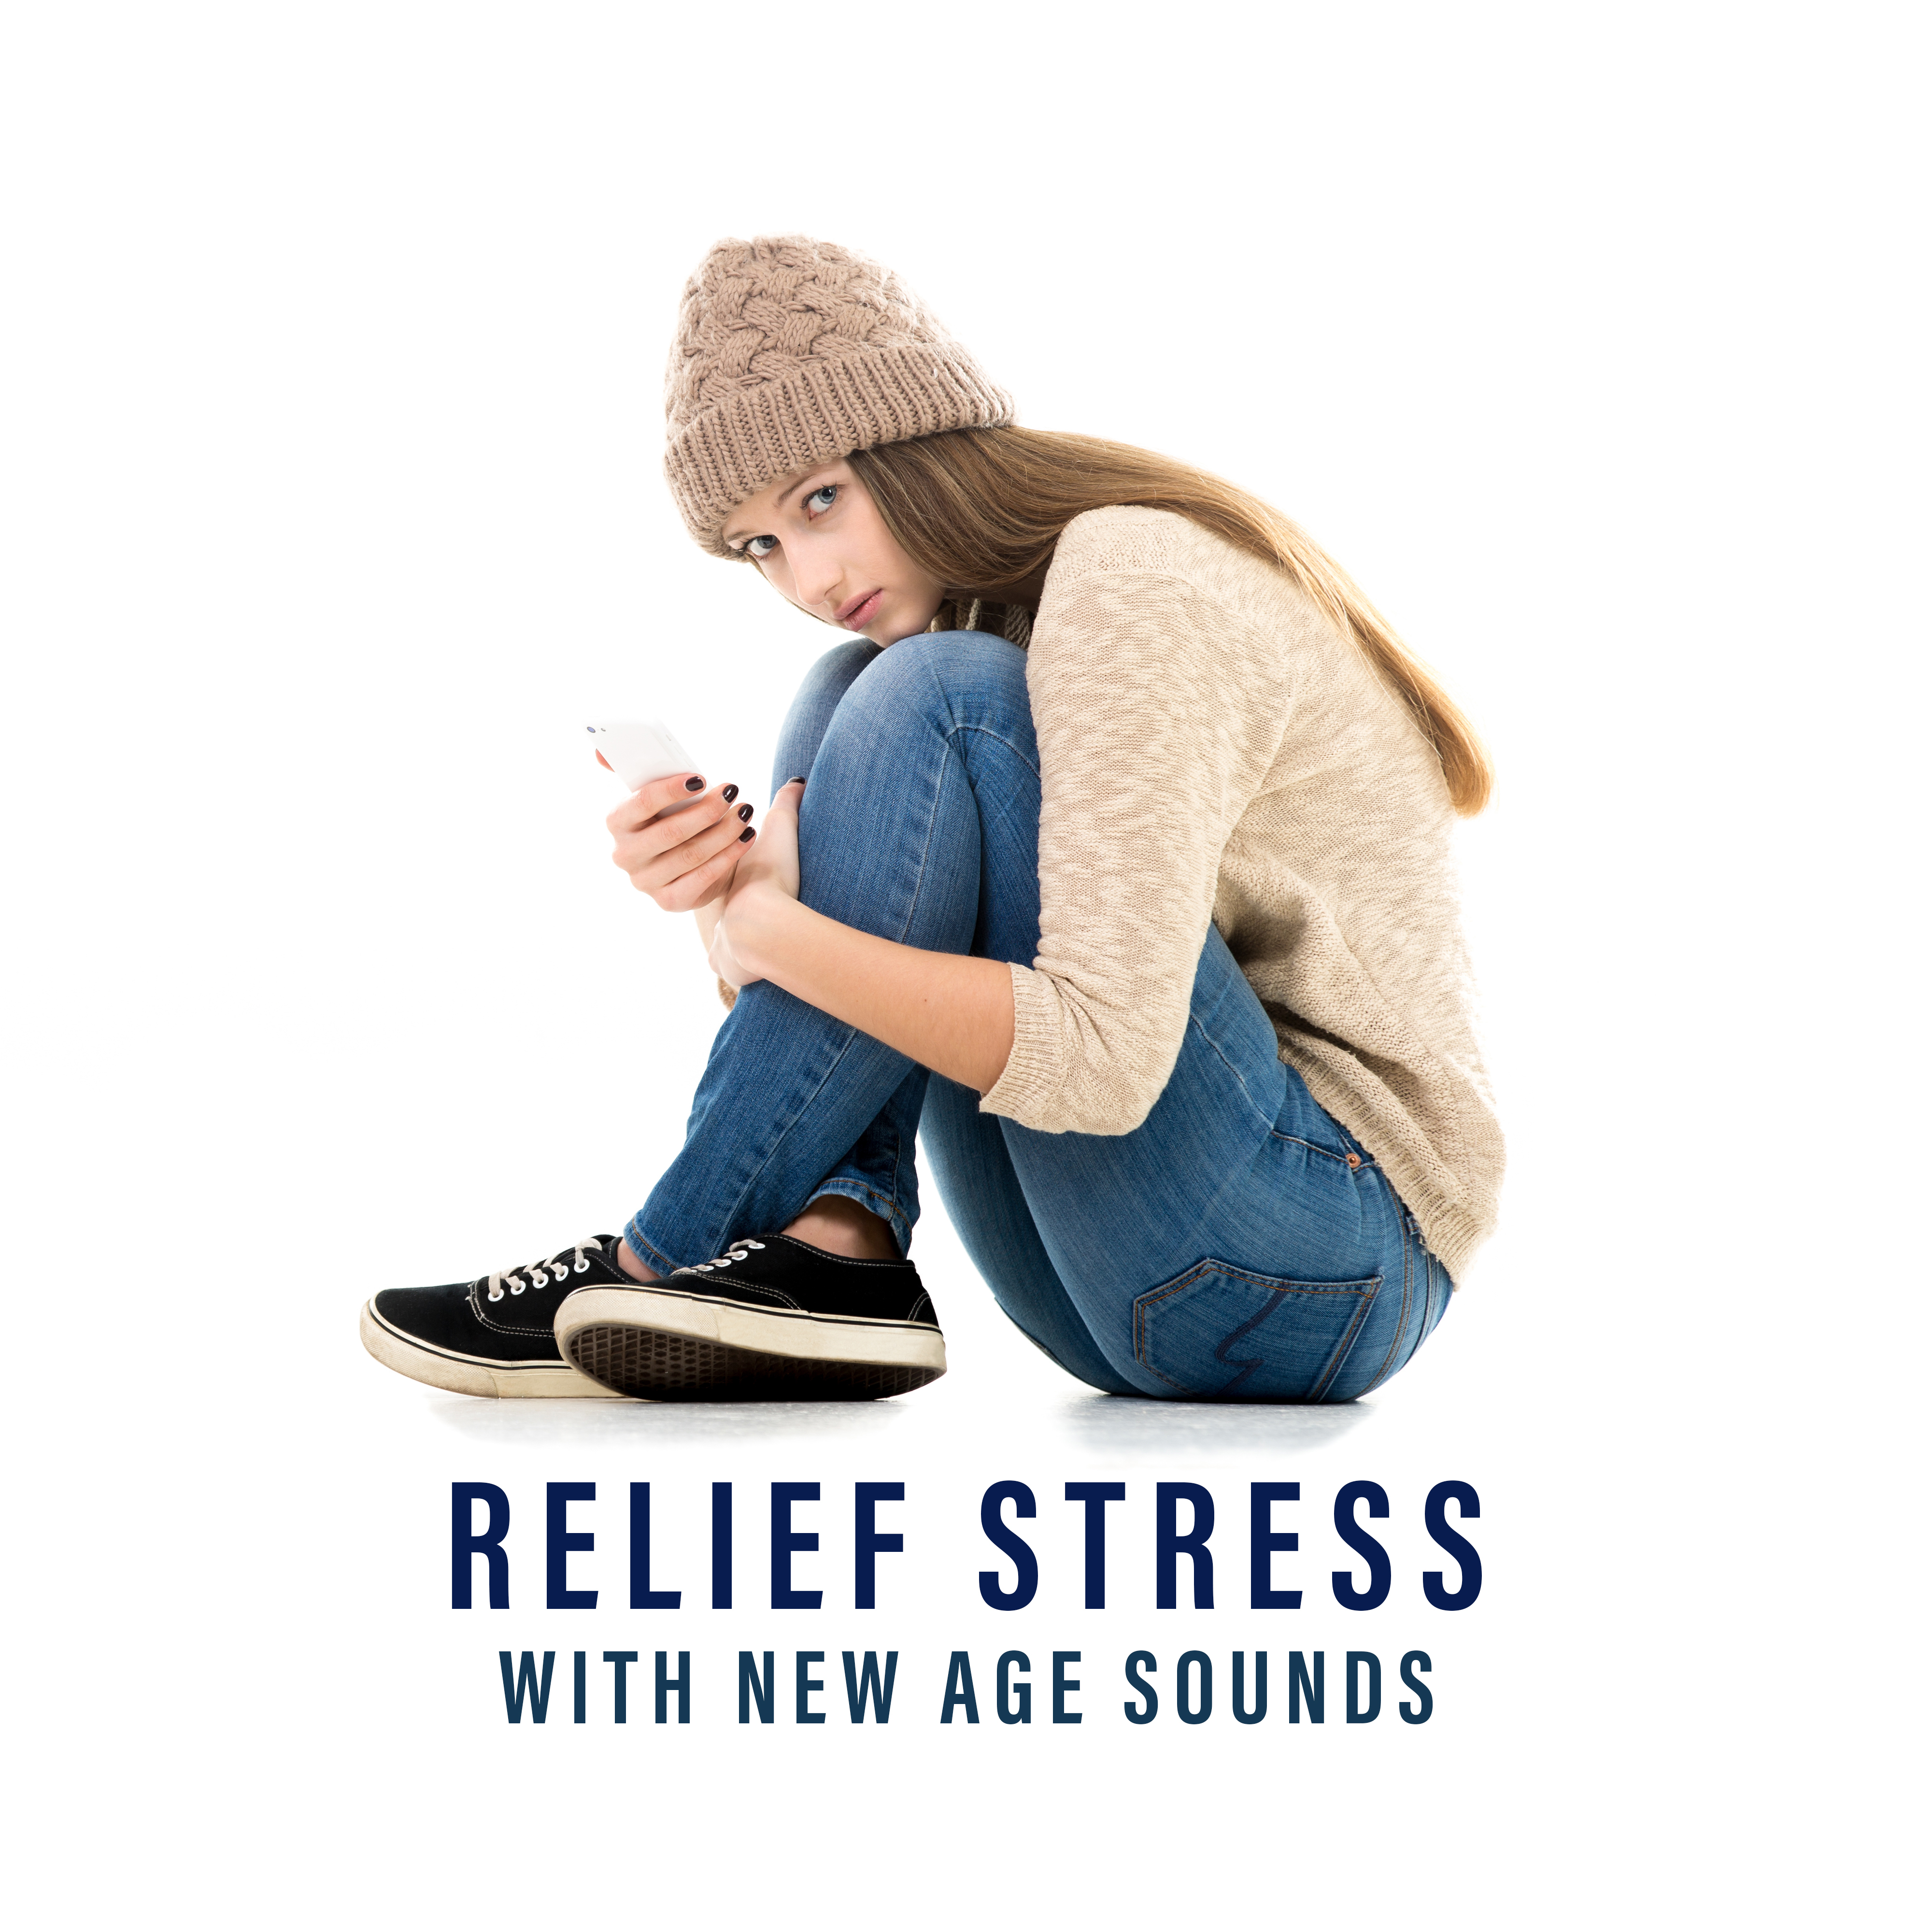 Relief Stress with New Age Sounds